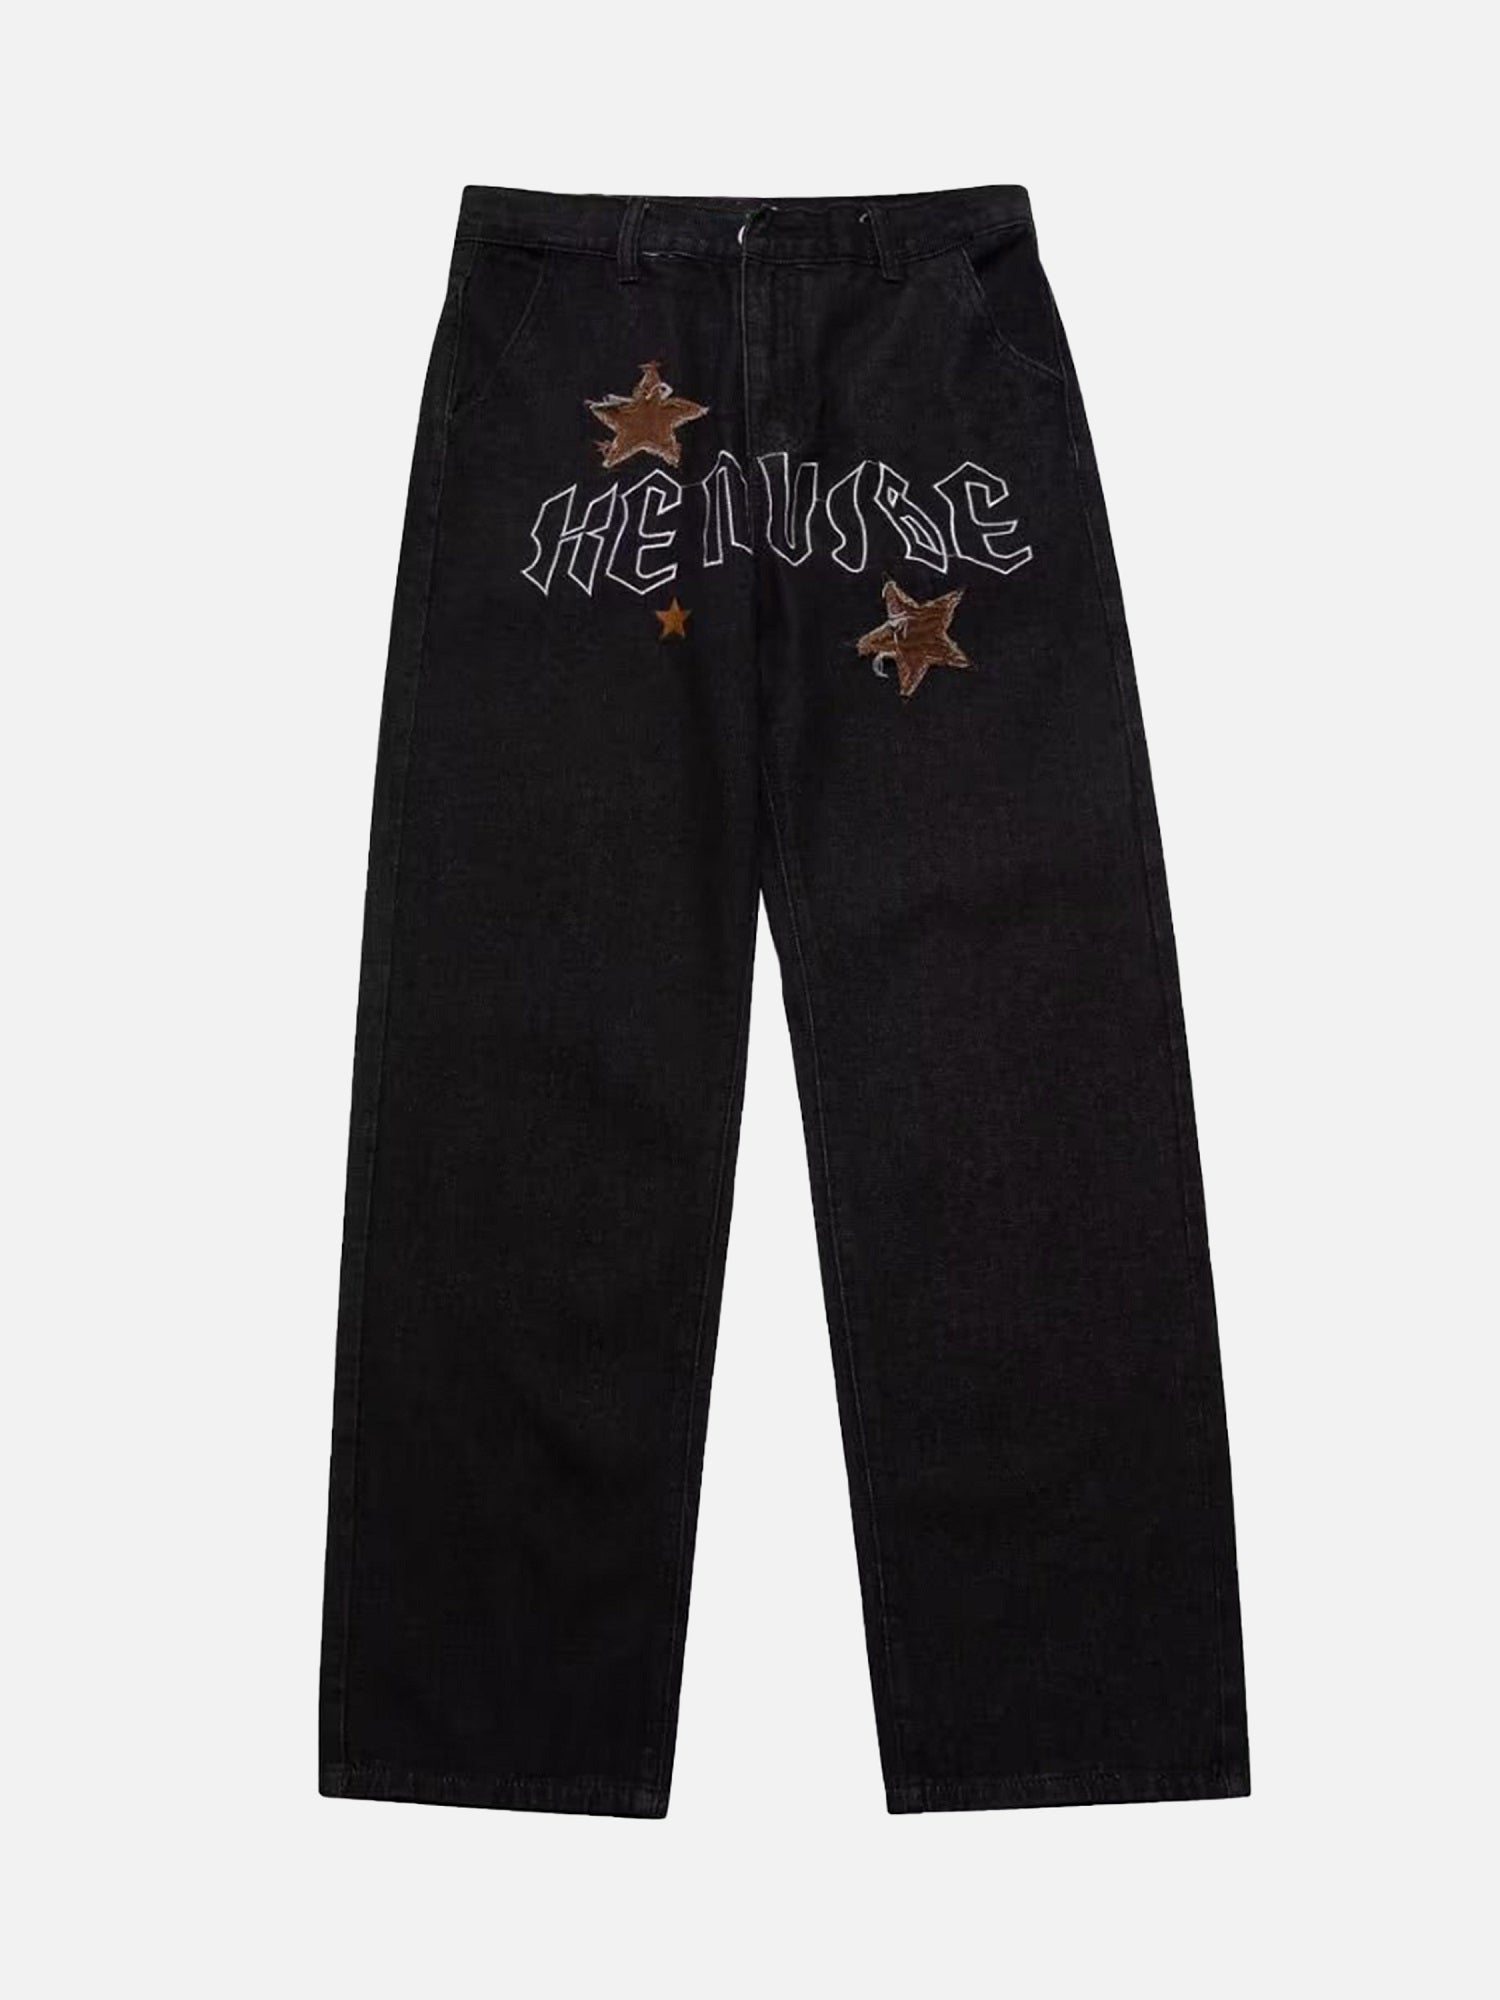 Thesupermade American High Street Patchwork Star Embroidered Jeans